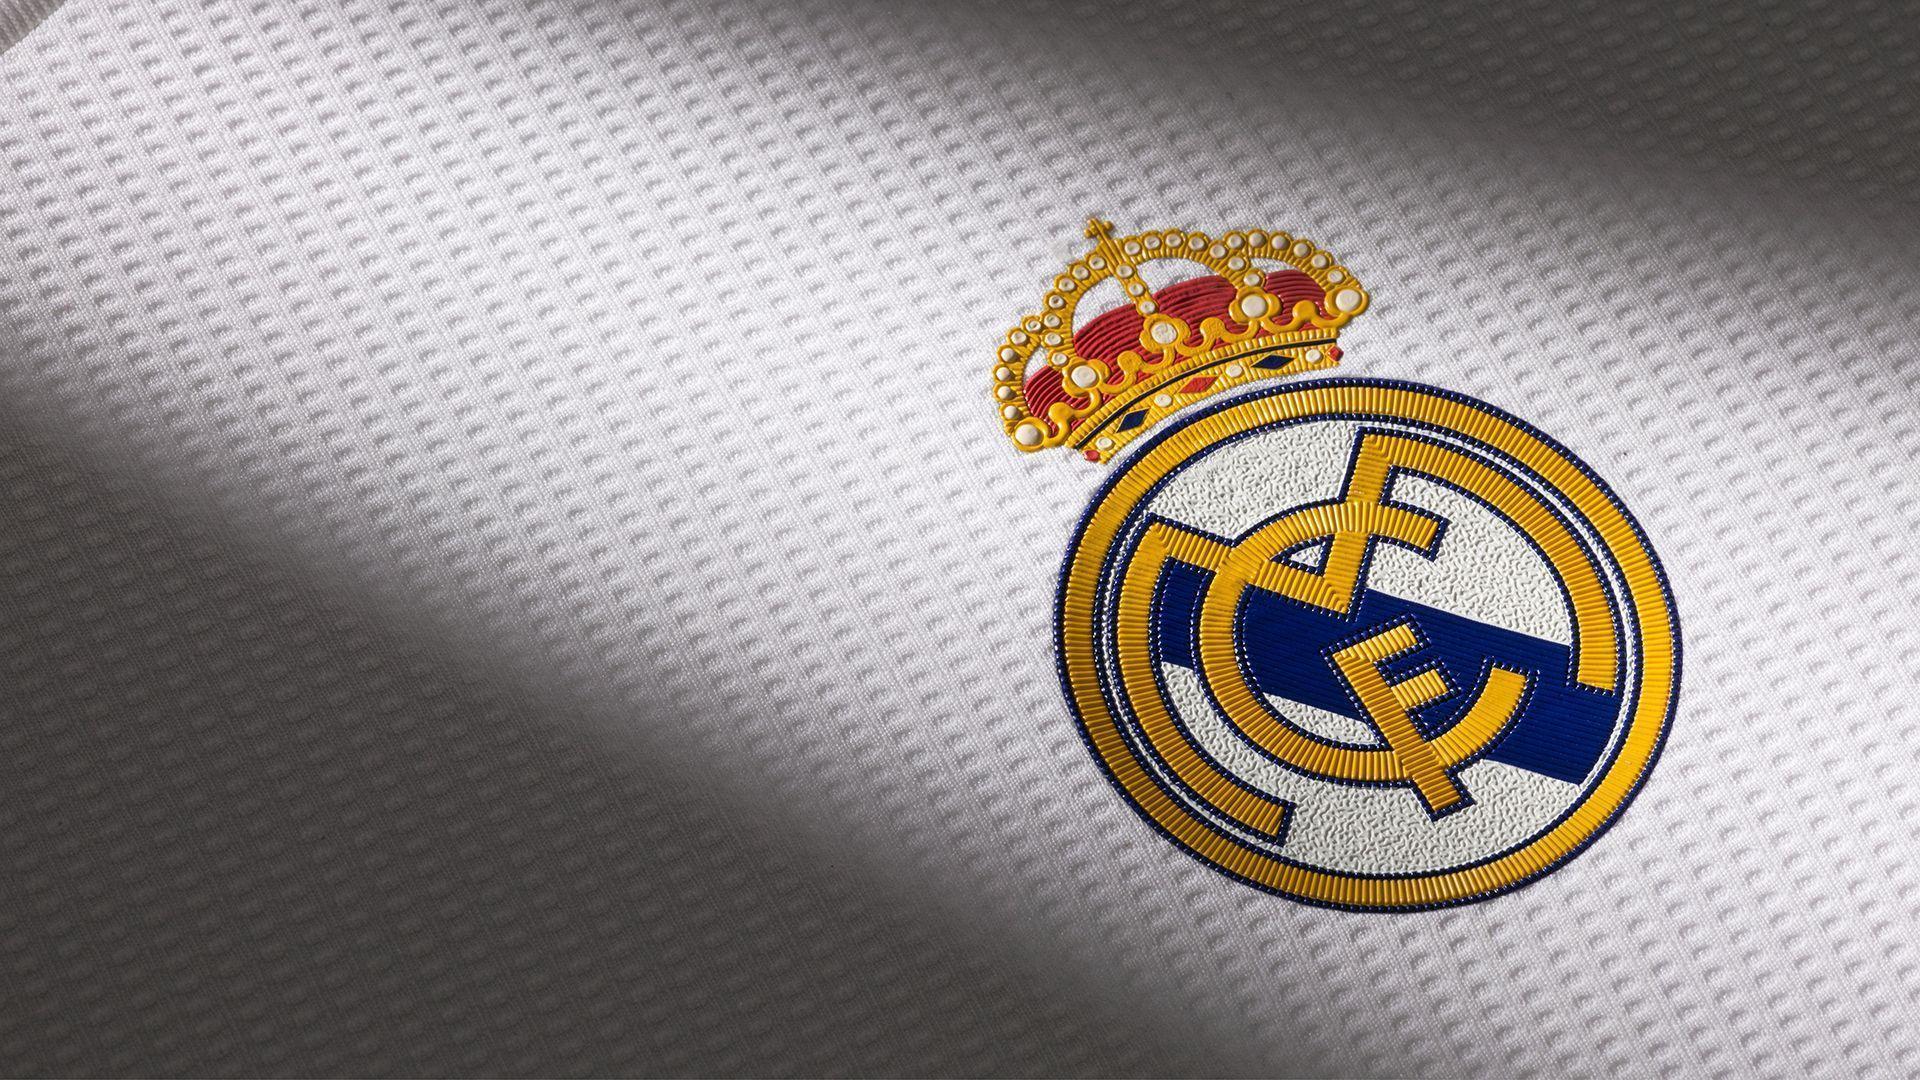 Full size Real Madrid Poster 2017 Wallpaper HD